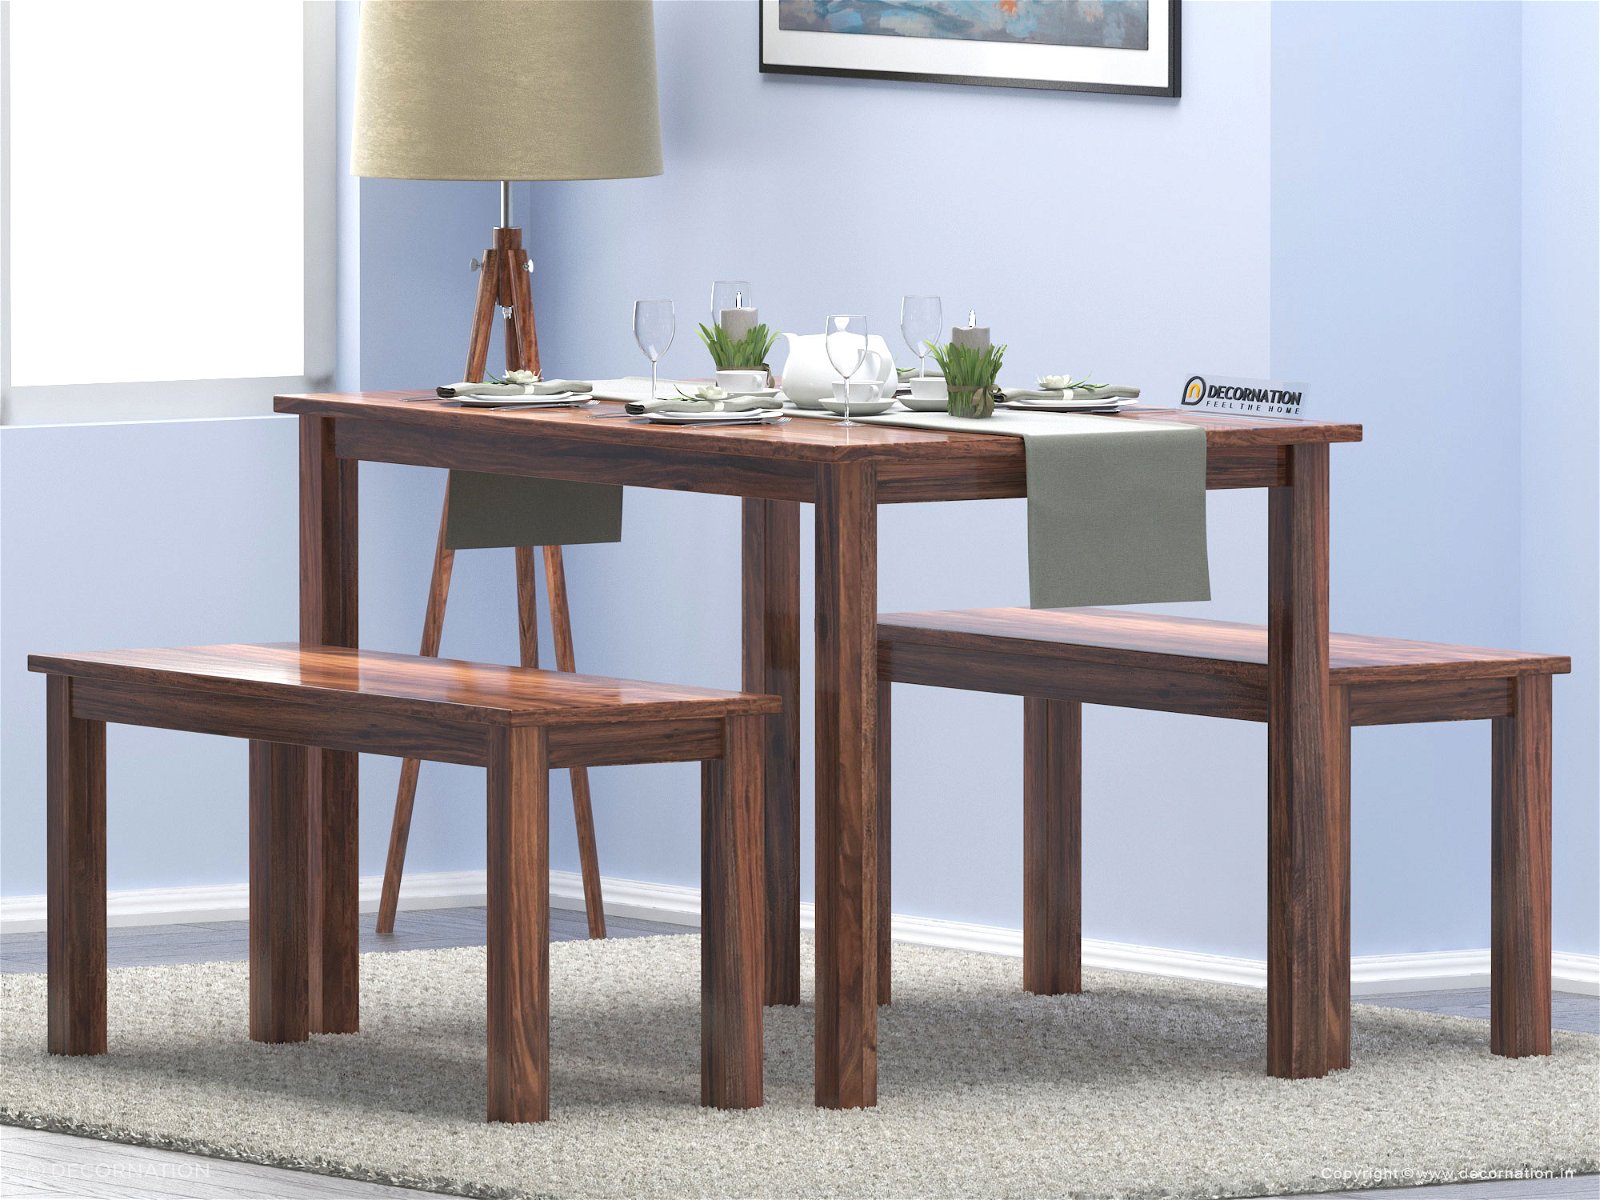 2 Seater Dining Table Sets